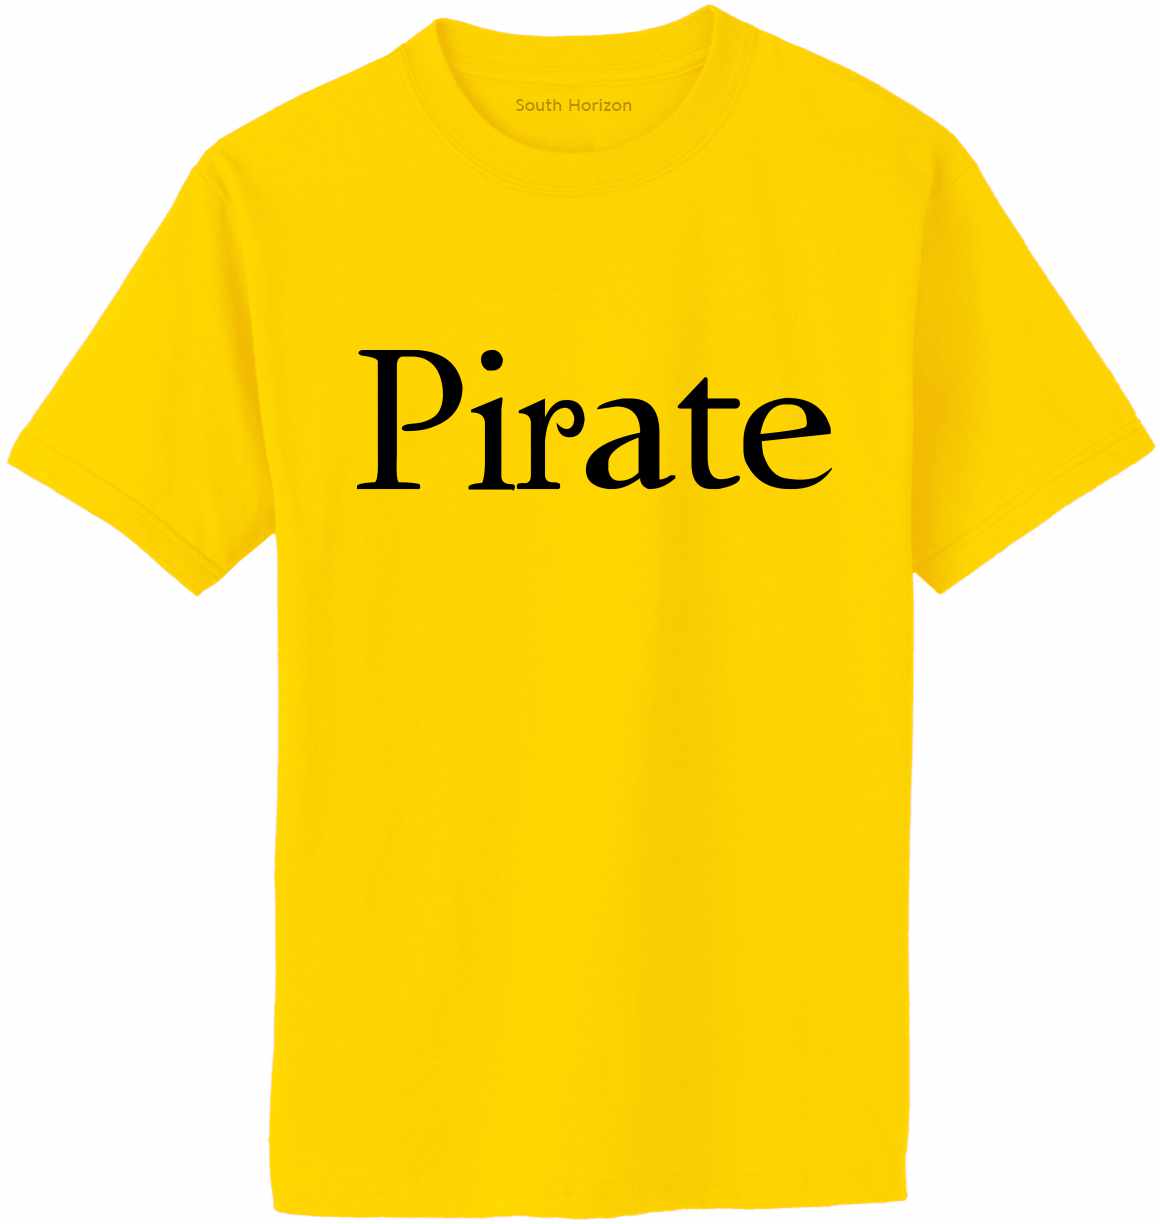 Pirate Adult T-Shirt